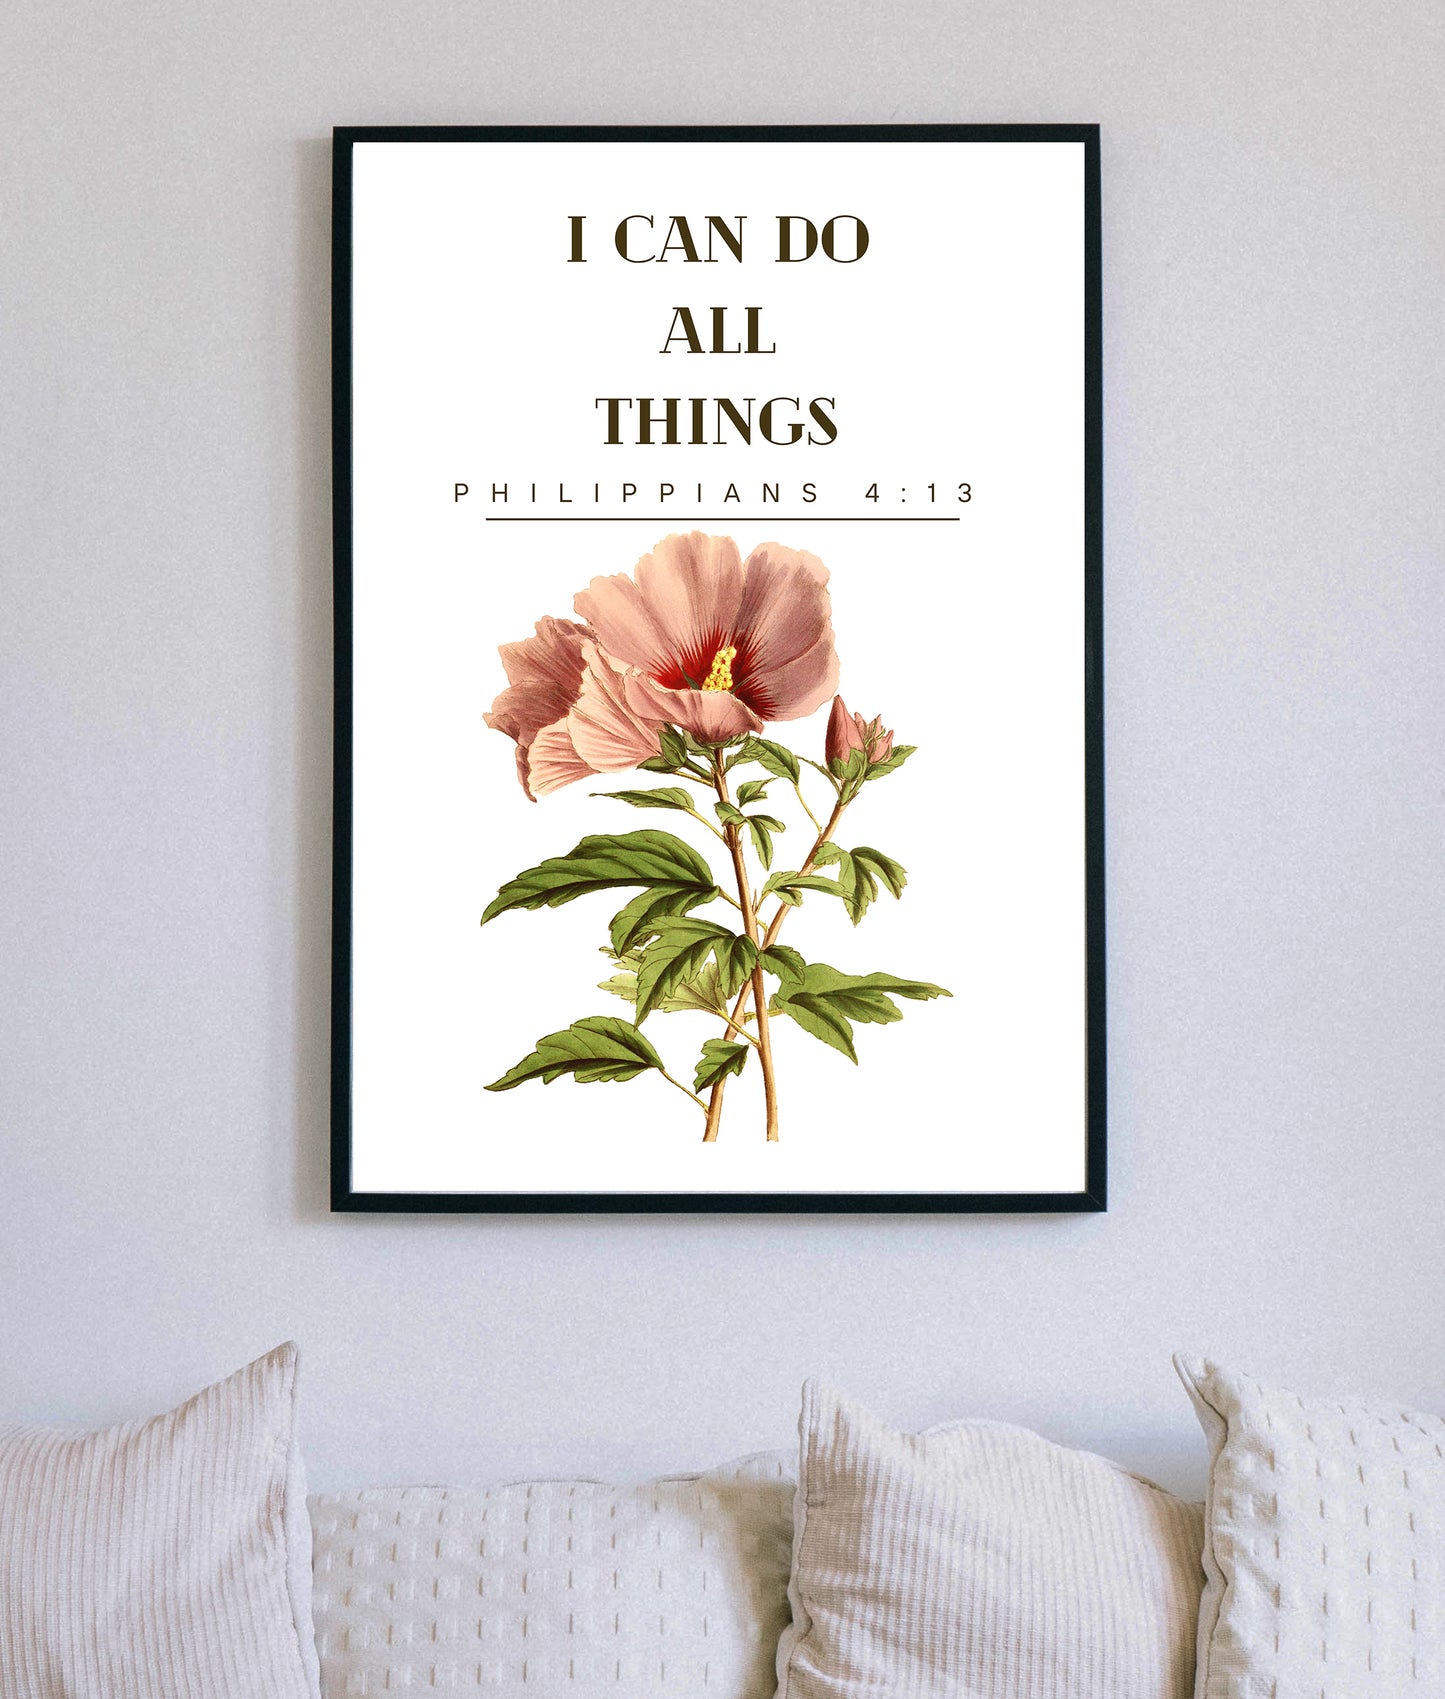 I Can Do All Things Christian Quote, Scripture, Bible Verse Poster Wall Art